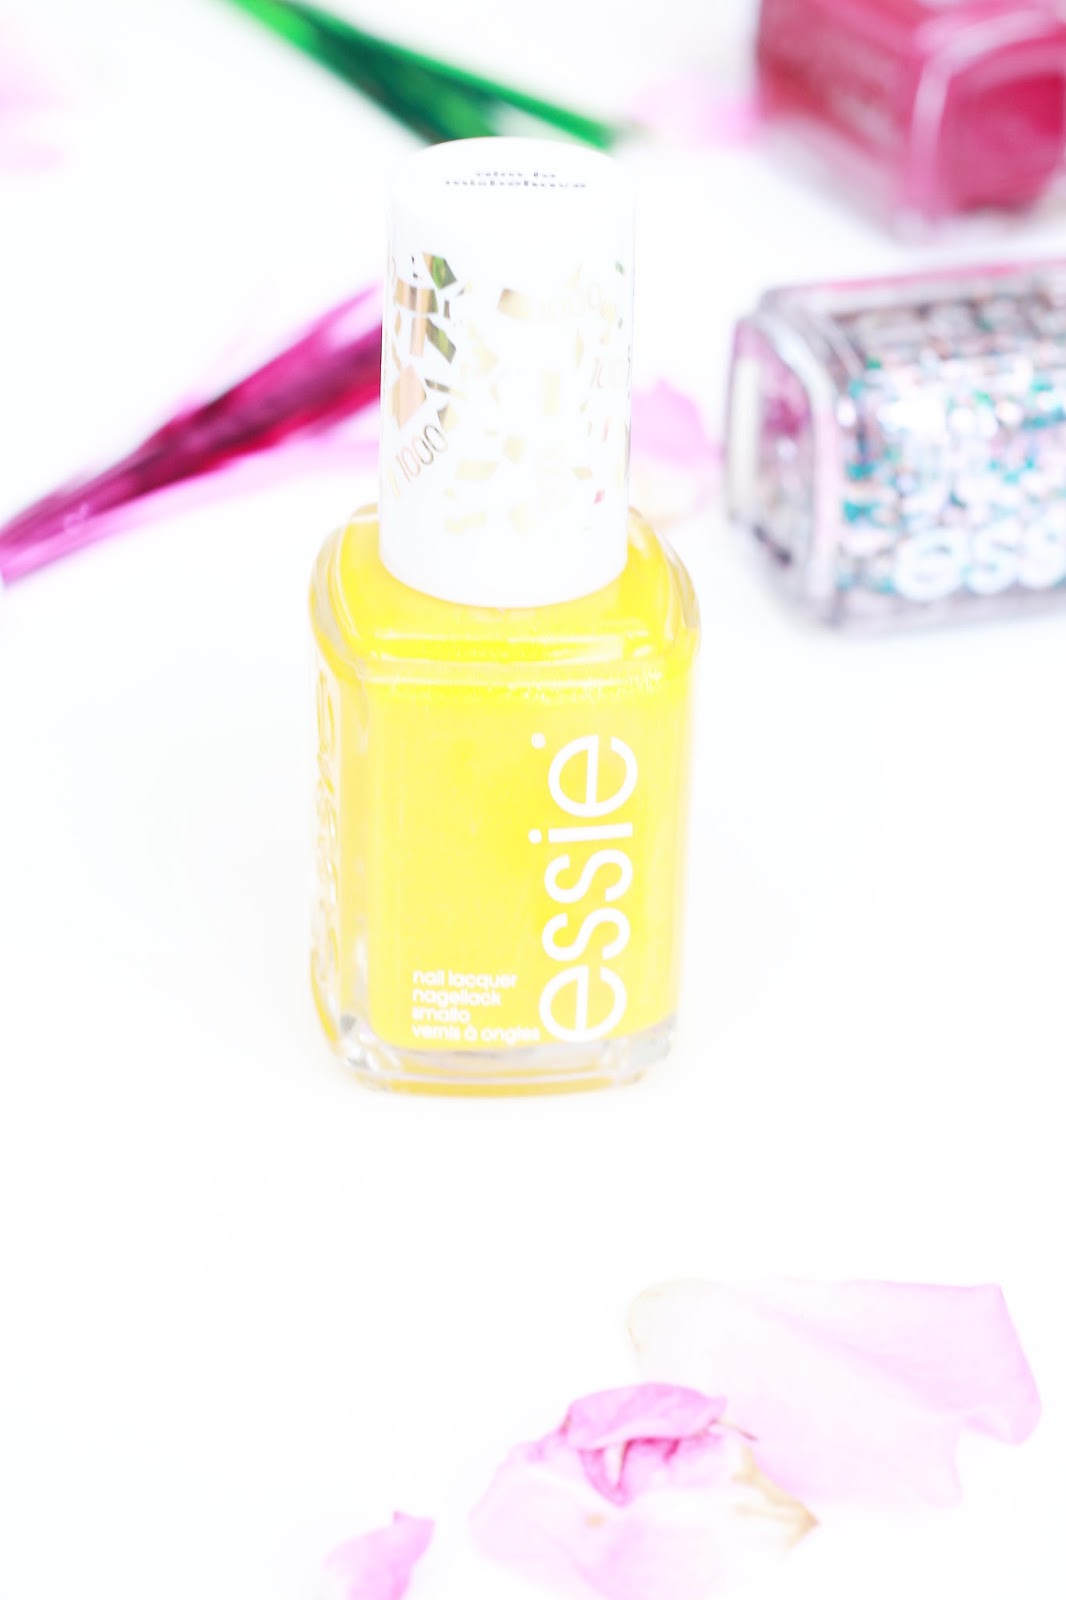 Beauty, Essie, Essie rio collection, nails, nail polish, Drugstore, essie rio collection, essie rio nails, nail swatches,